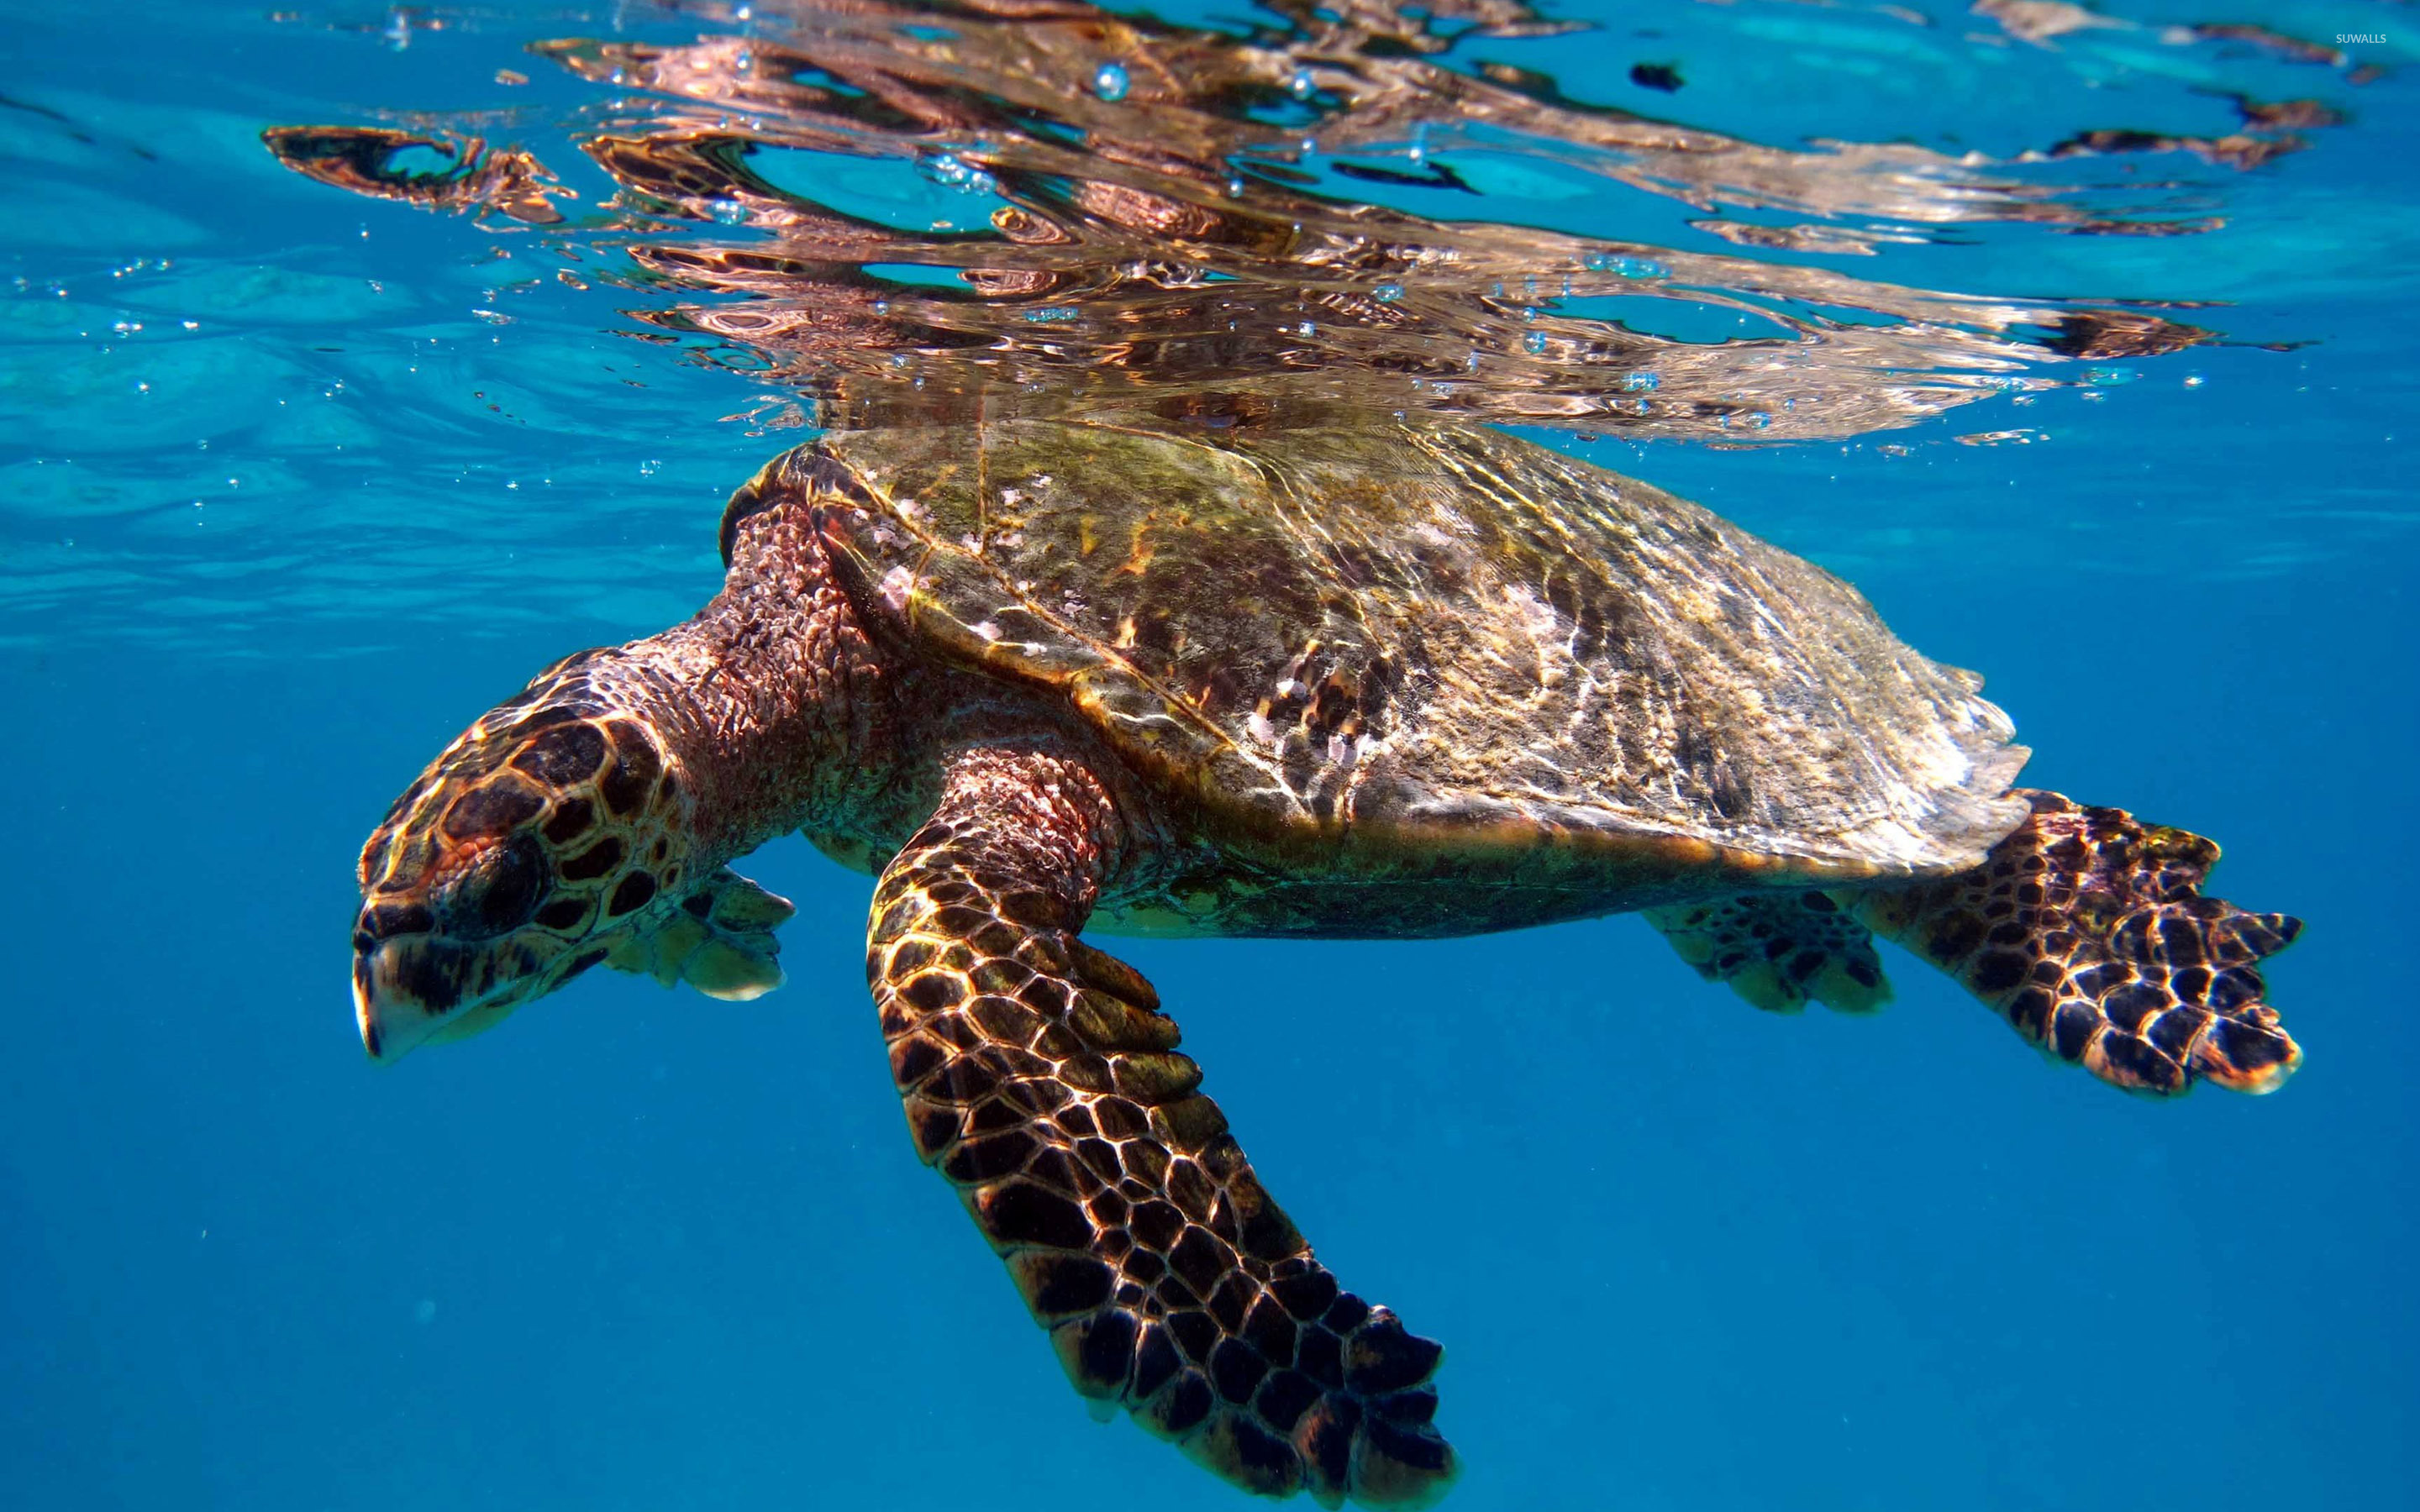 Turtle swimming in the clear blue water wallpaper - Animal wallpapers ...